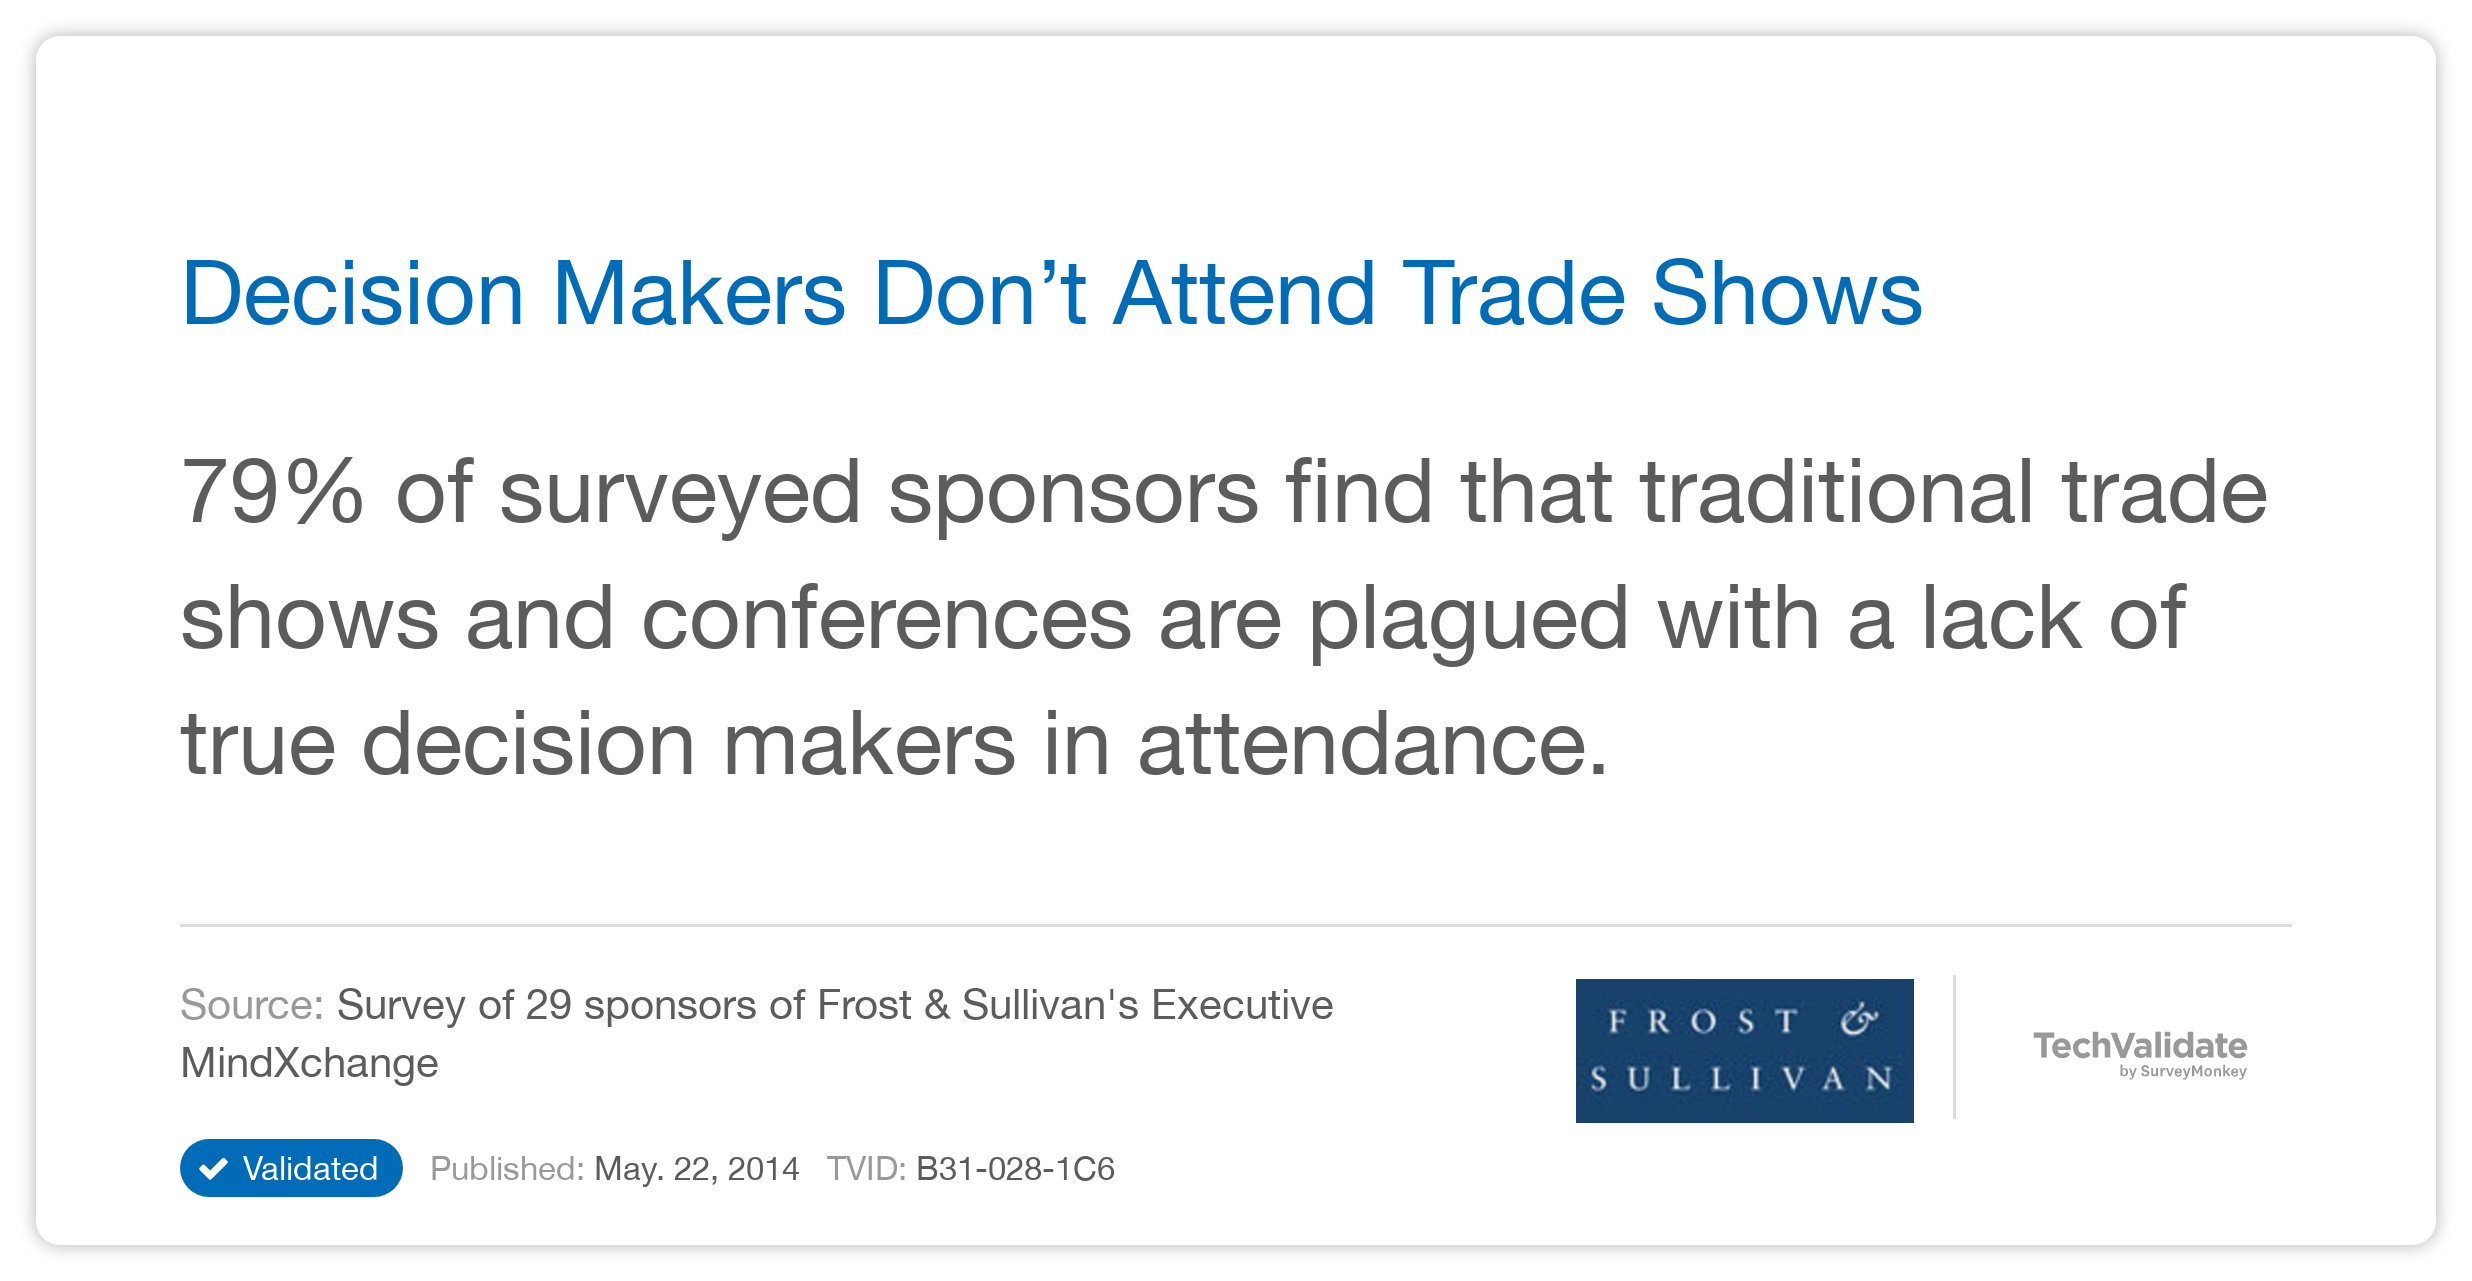 Decision Makers Don't Attend Trade Shows